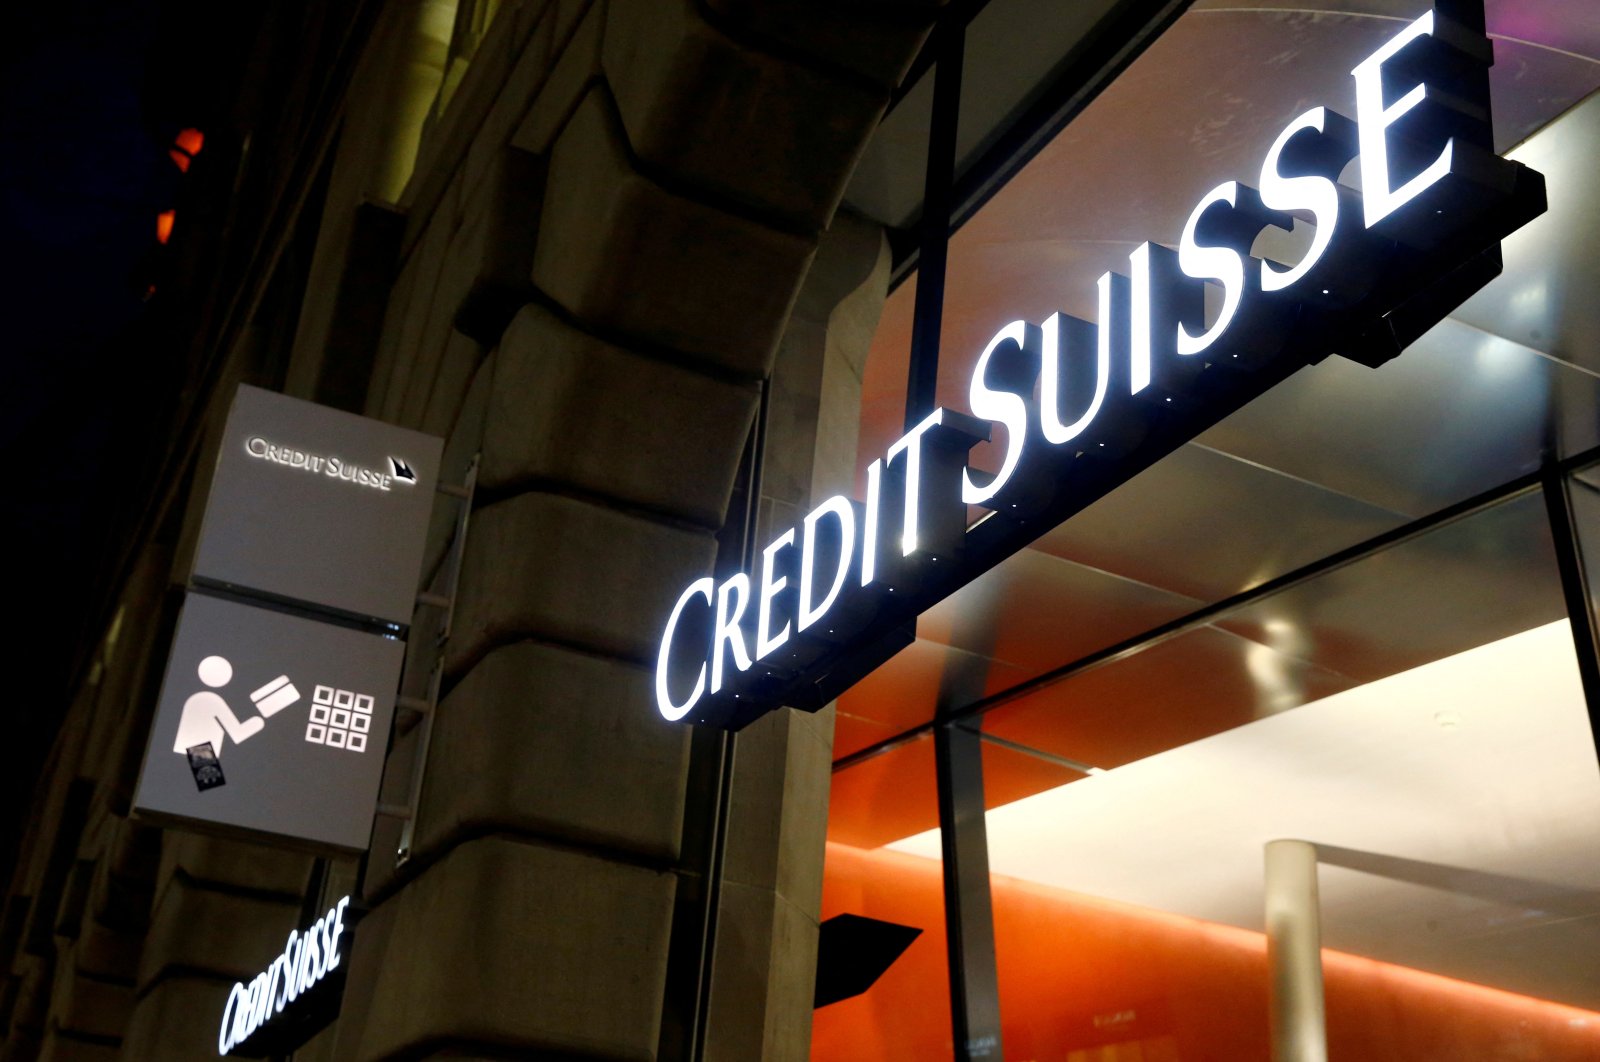 The logo of Swiss bank Credit Suisse is seen at a branch office in Zurich, Switzerland, Nov. 3, 2021. (Reuters Photo)